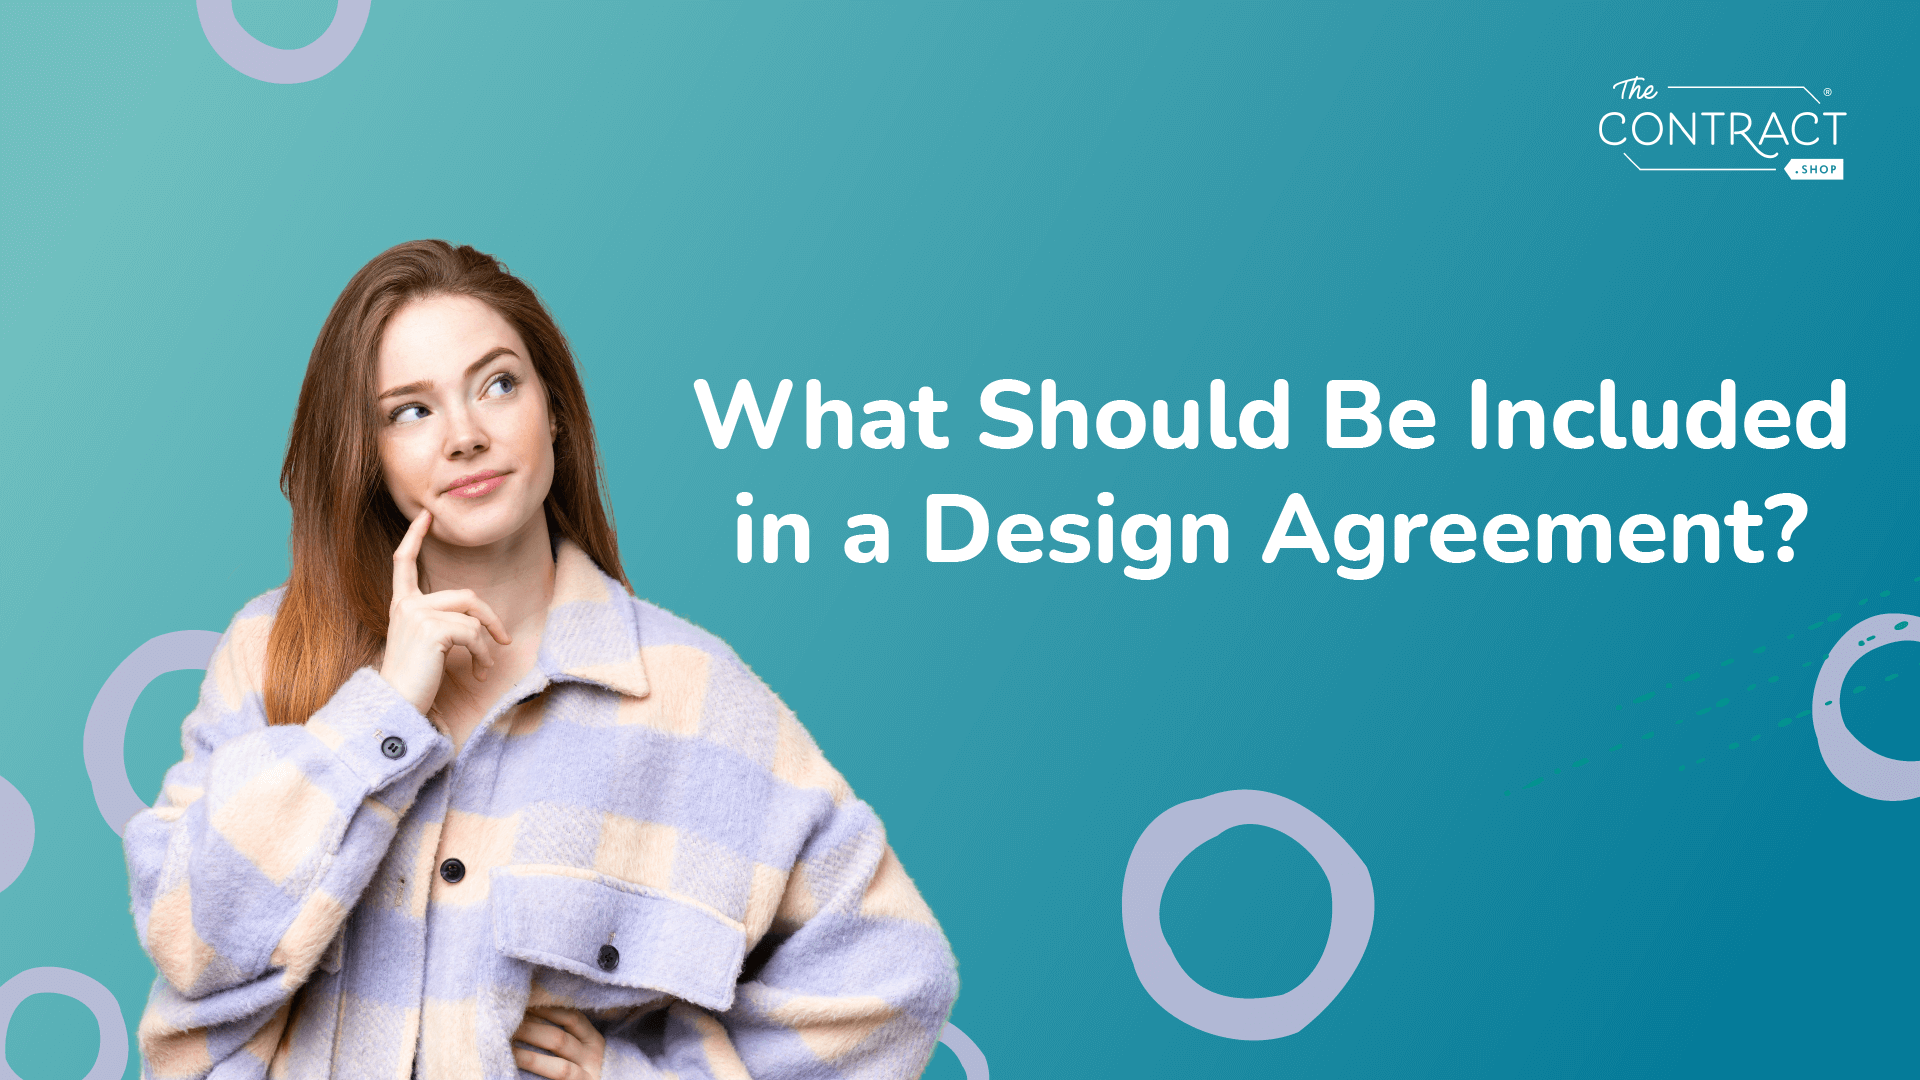 What Should Be Included in a Design Agreement?